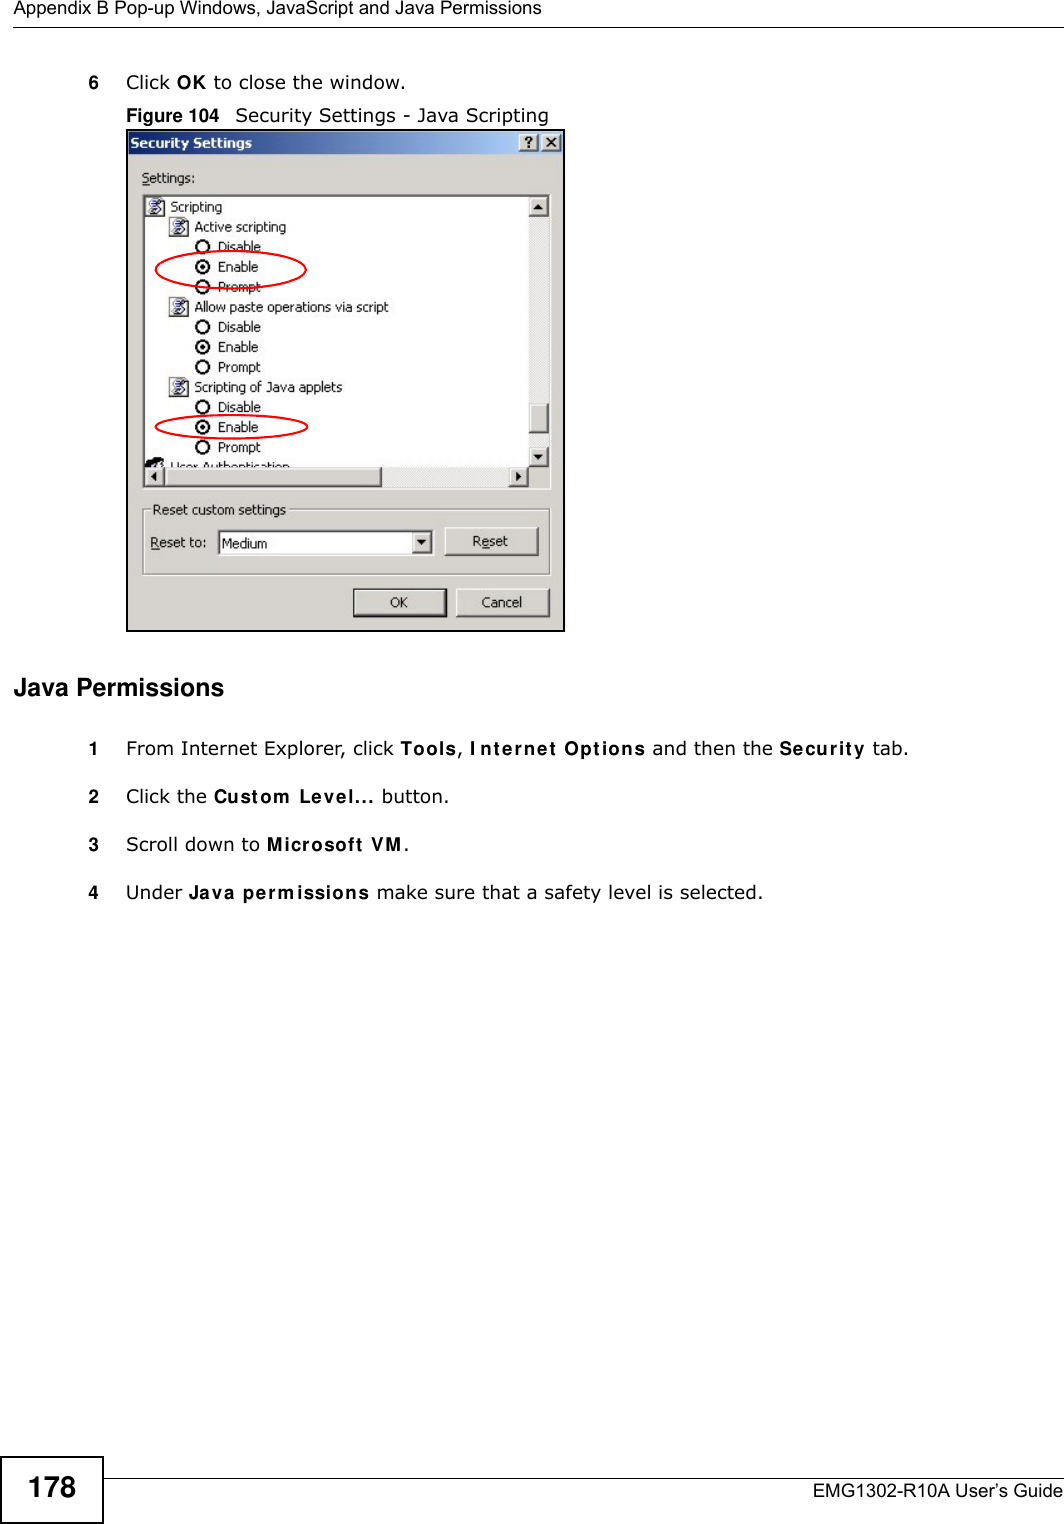 Appendix B Pop-up Windows, JavaScript and Java PermissionsEMG1302-R10A User’s Guide1786Click OK to close the window.Figure 104   Security Settings - Java ScriptingJava Permissions1From Internet Explorer, click Tools, I nt e r ne t  Opt ions and then the Security tab. 2Click the Custom  Le vel... button. 3Scroll down to Microsoft  VM . 4Under Java perm issions make sure that a safety level is selected.